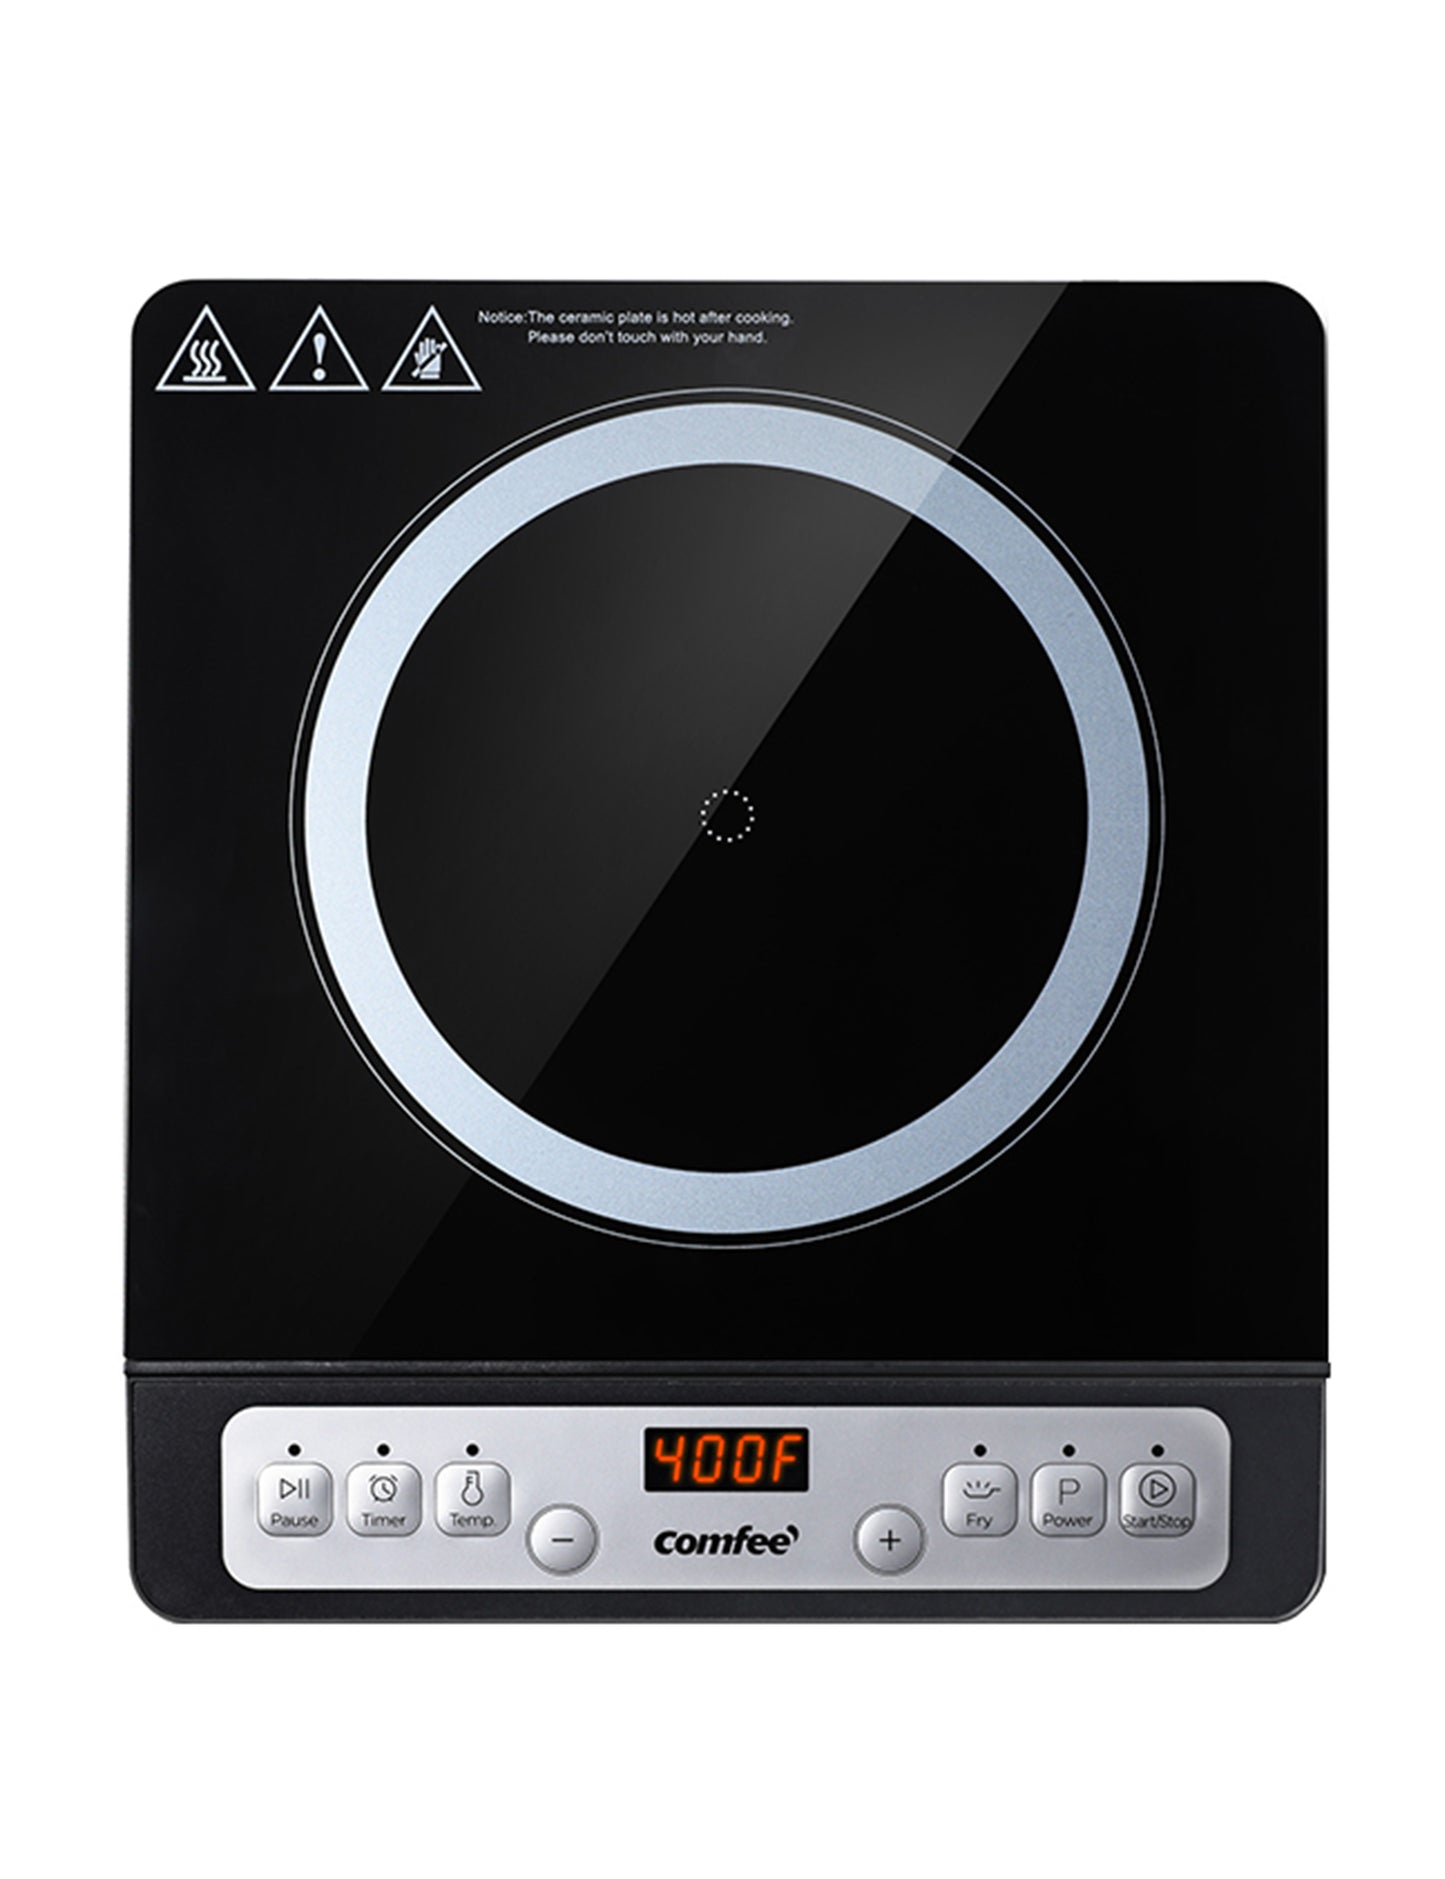 ovedhead view of the comfee electric comfee induction cooktop